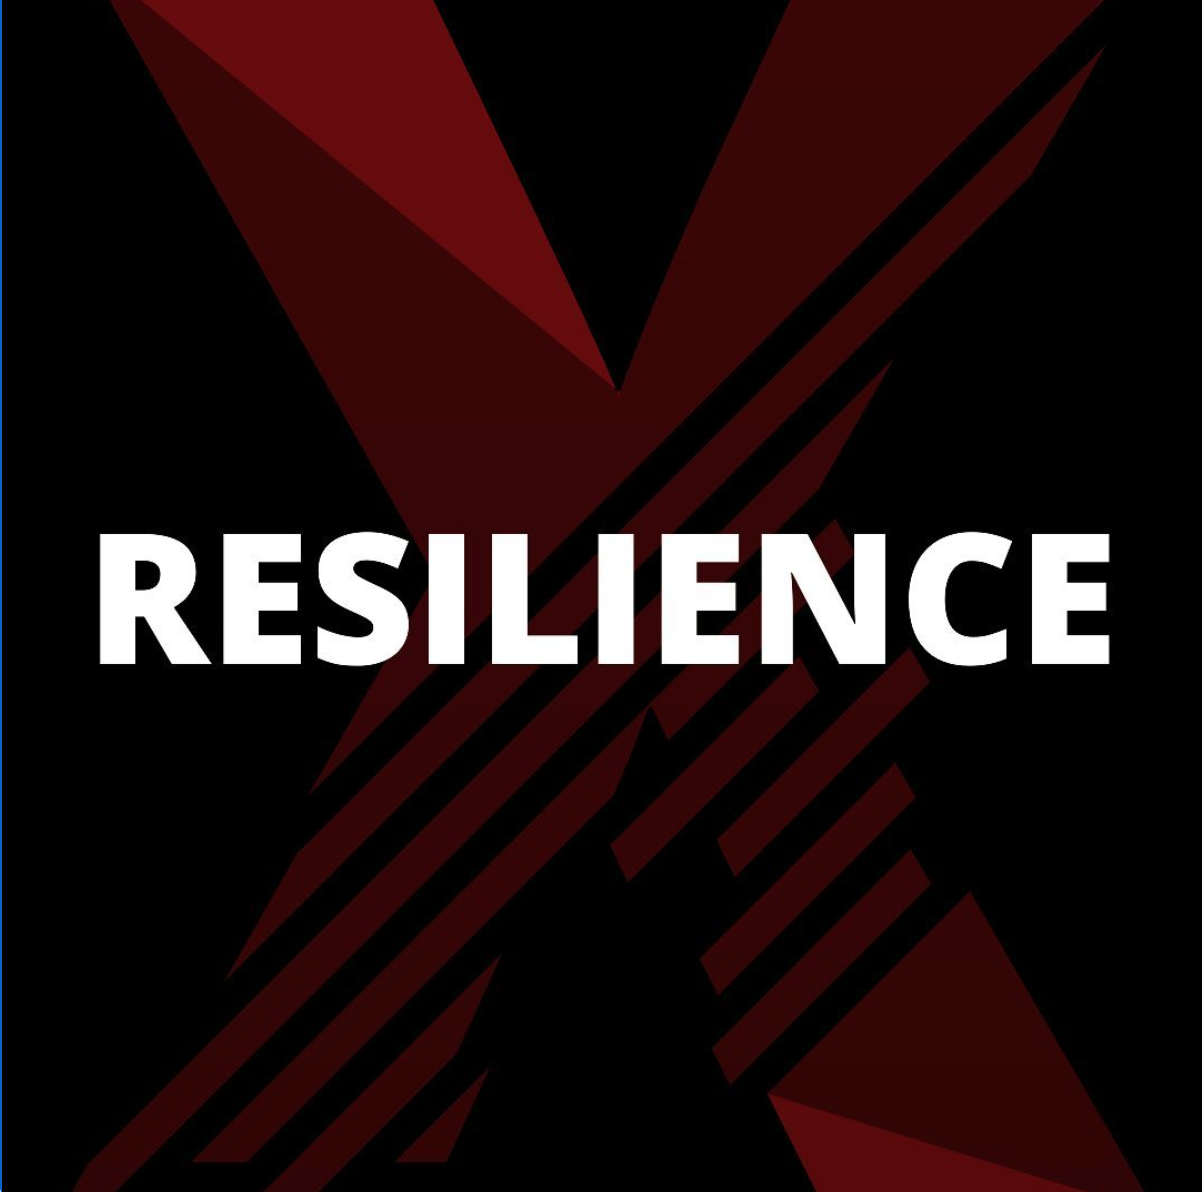 “Resilience”